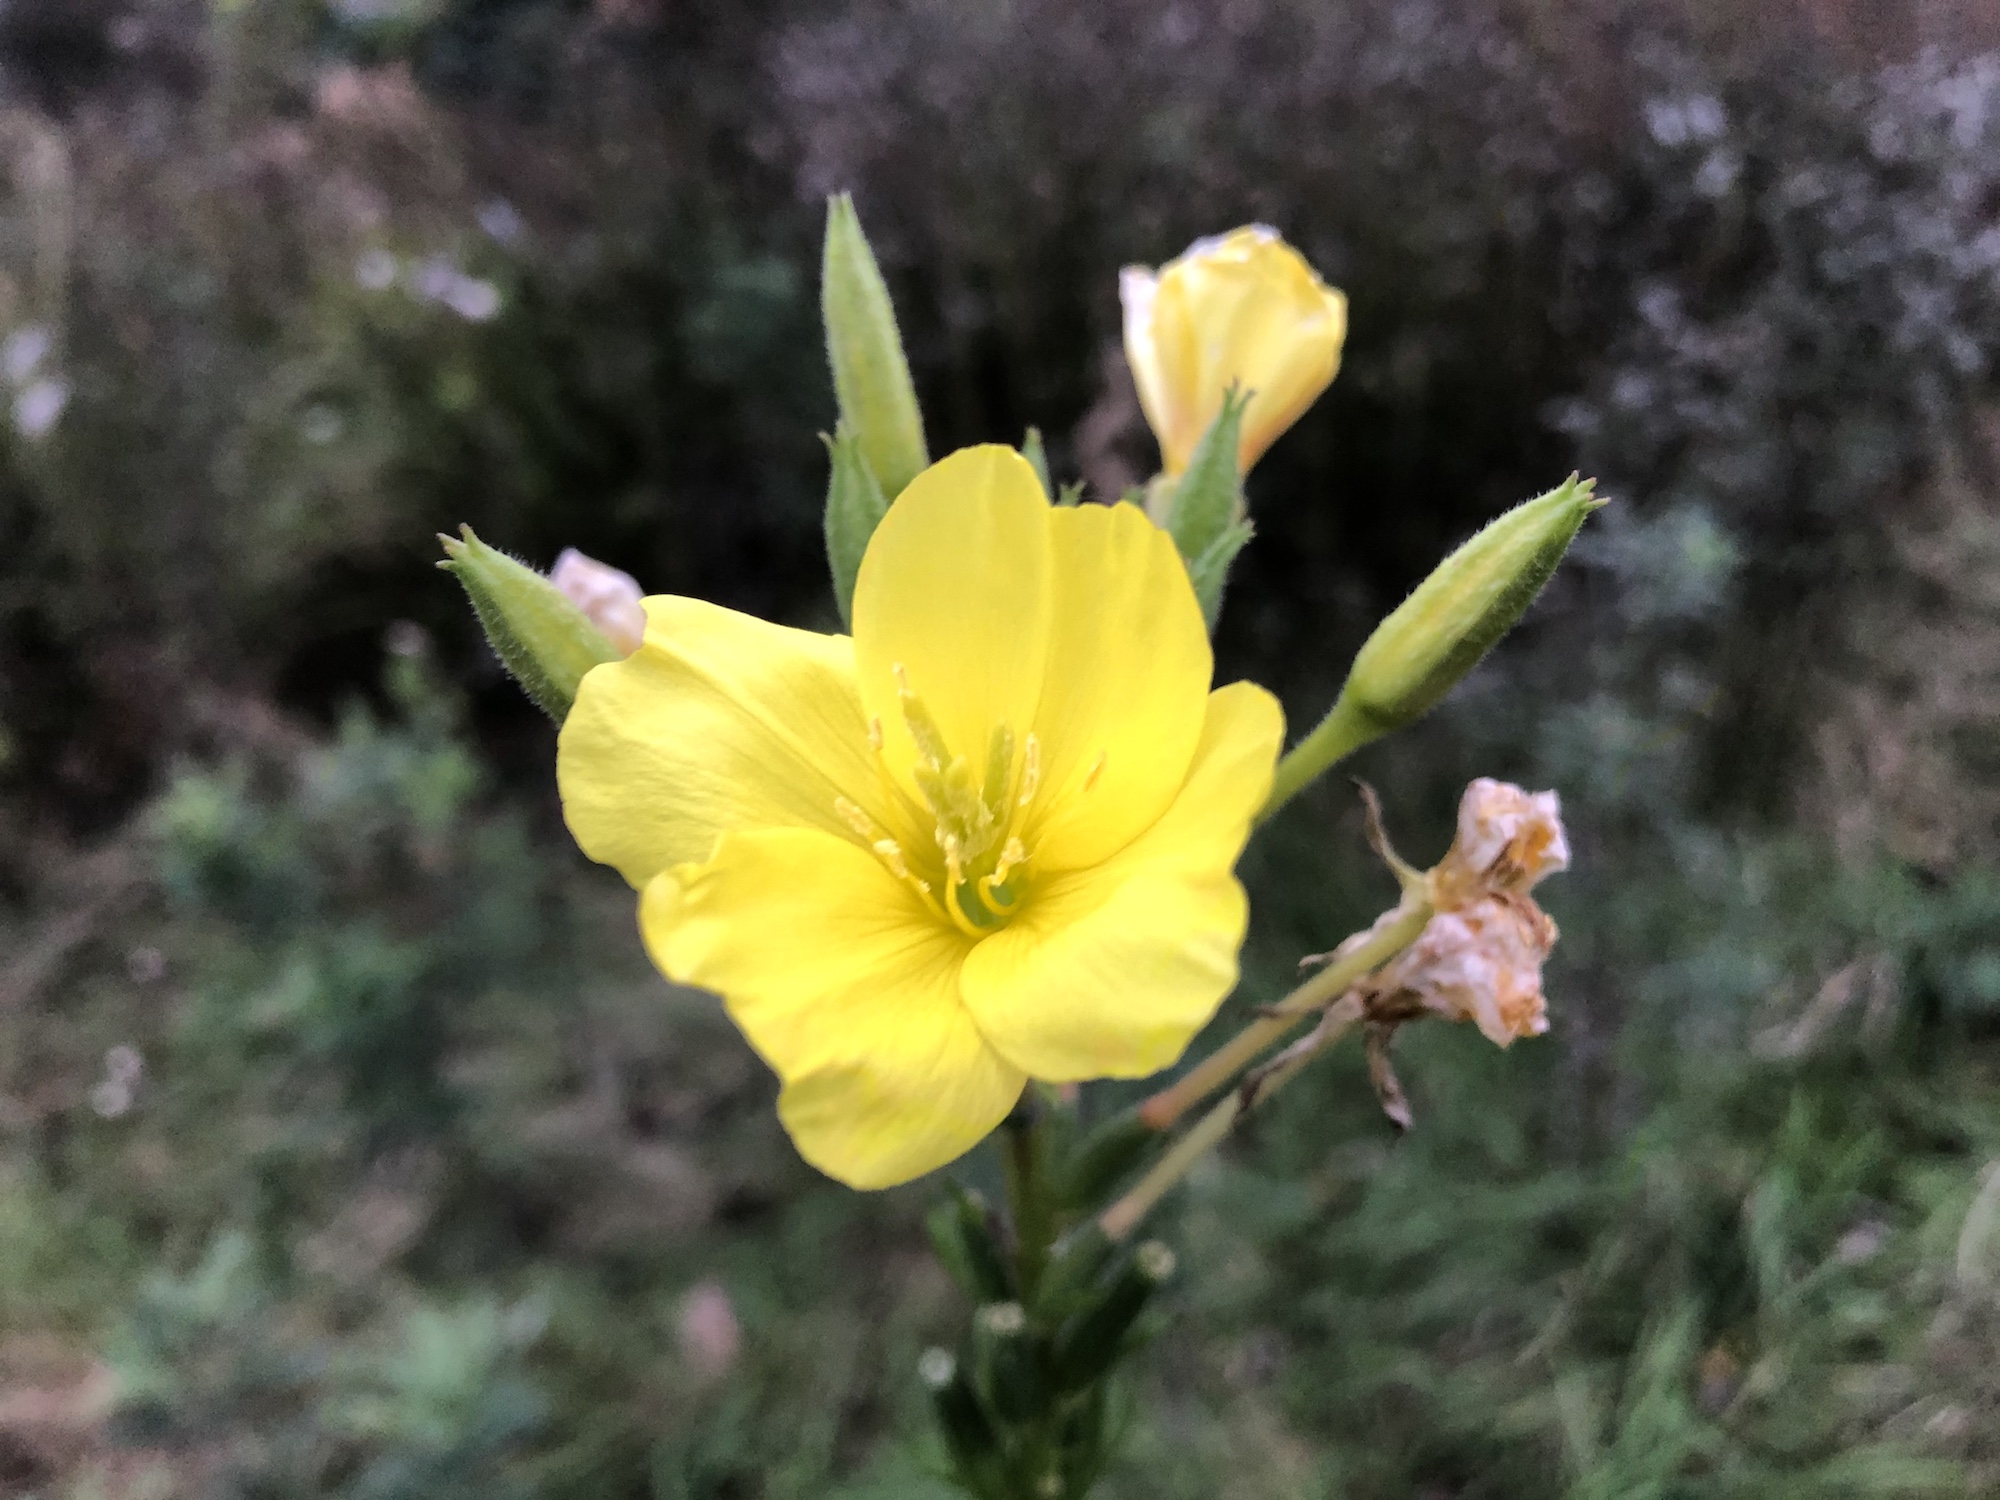 Evening Primrose along shore of the Retaining Pond on the corner of Nakoma Road and  Manitou Way on October 16, 2019.